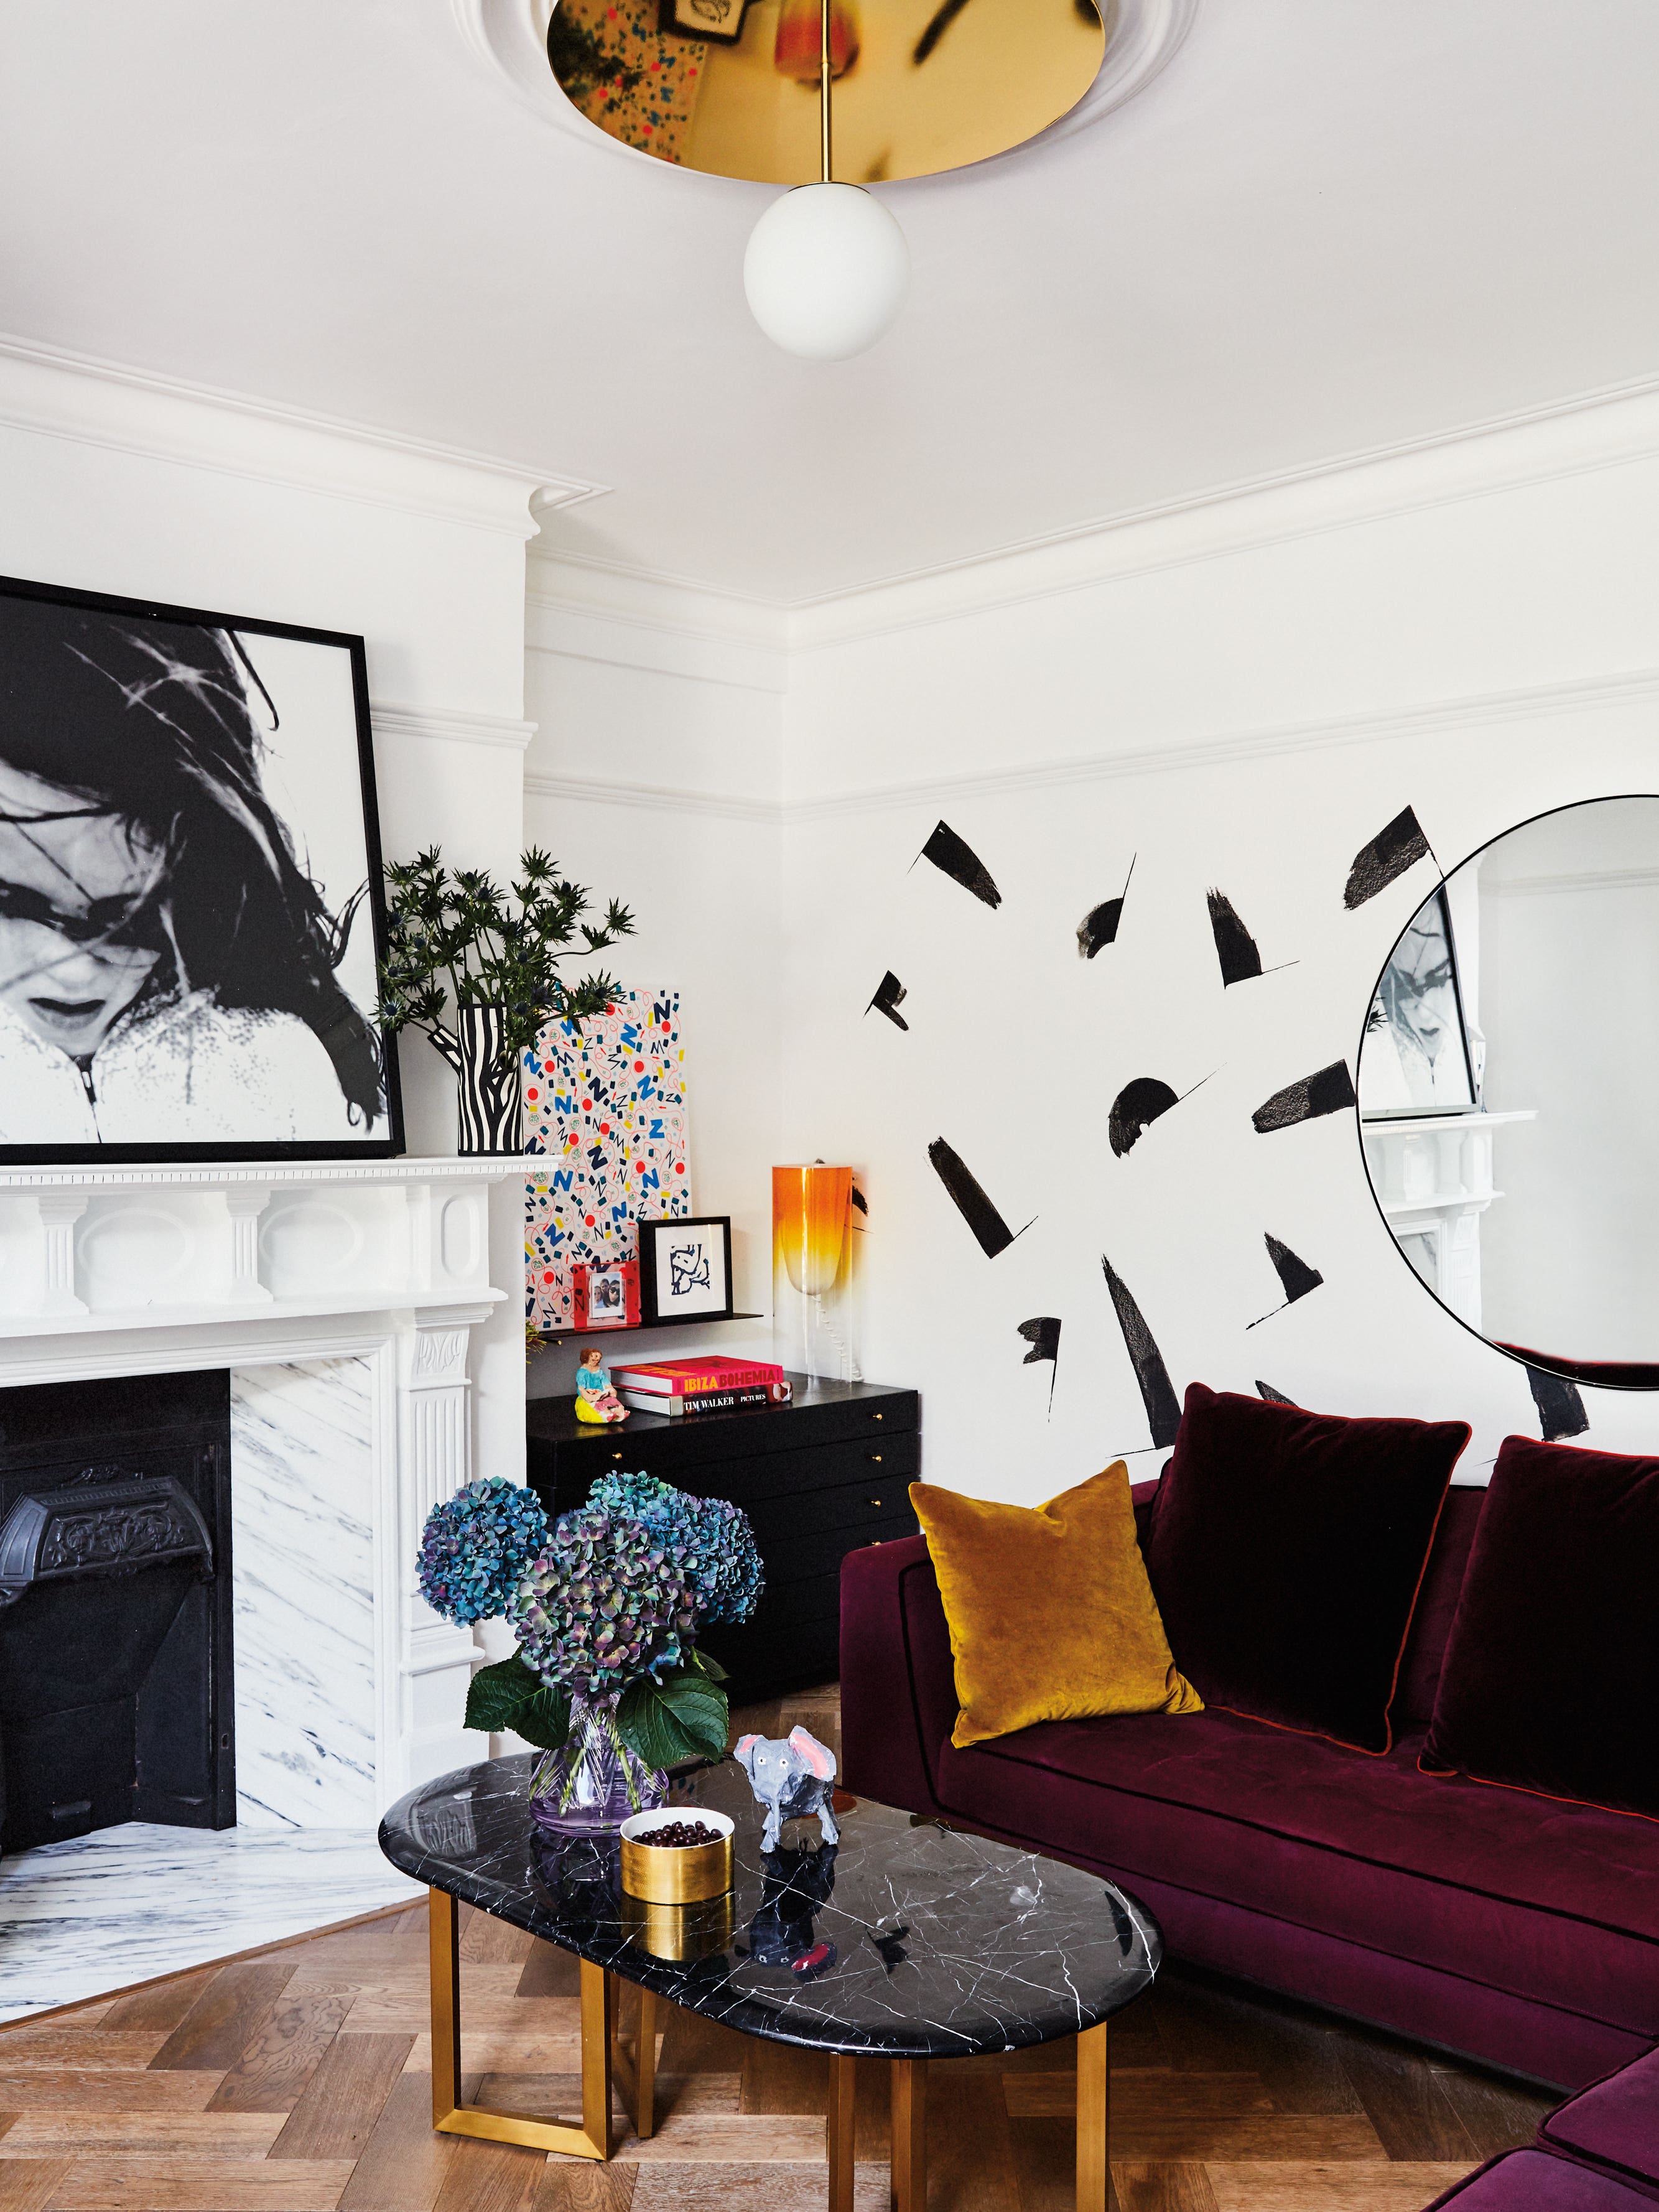 During a Difficult—But Triumphant—Year, This British Designer’s Atelier-Like Home Was Her Cocoon